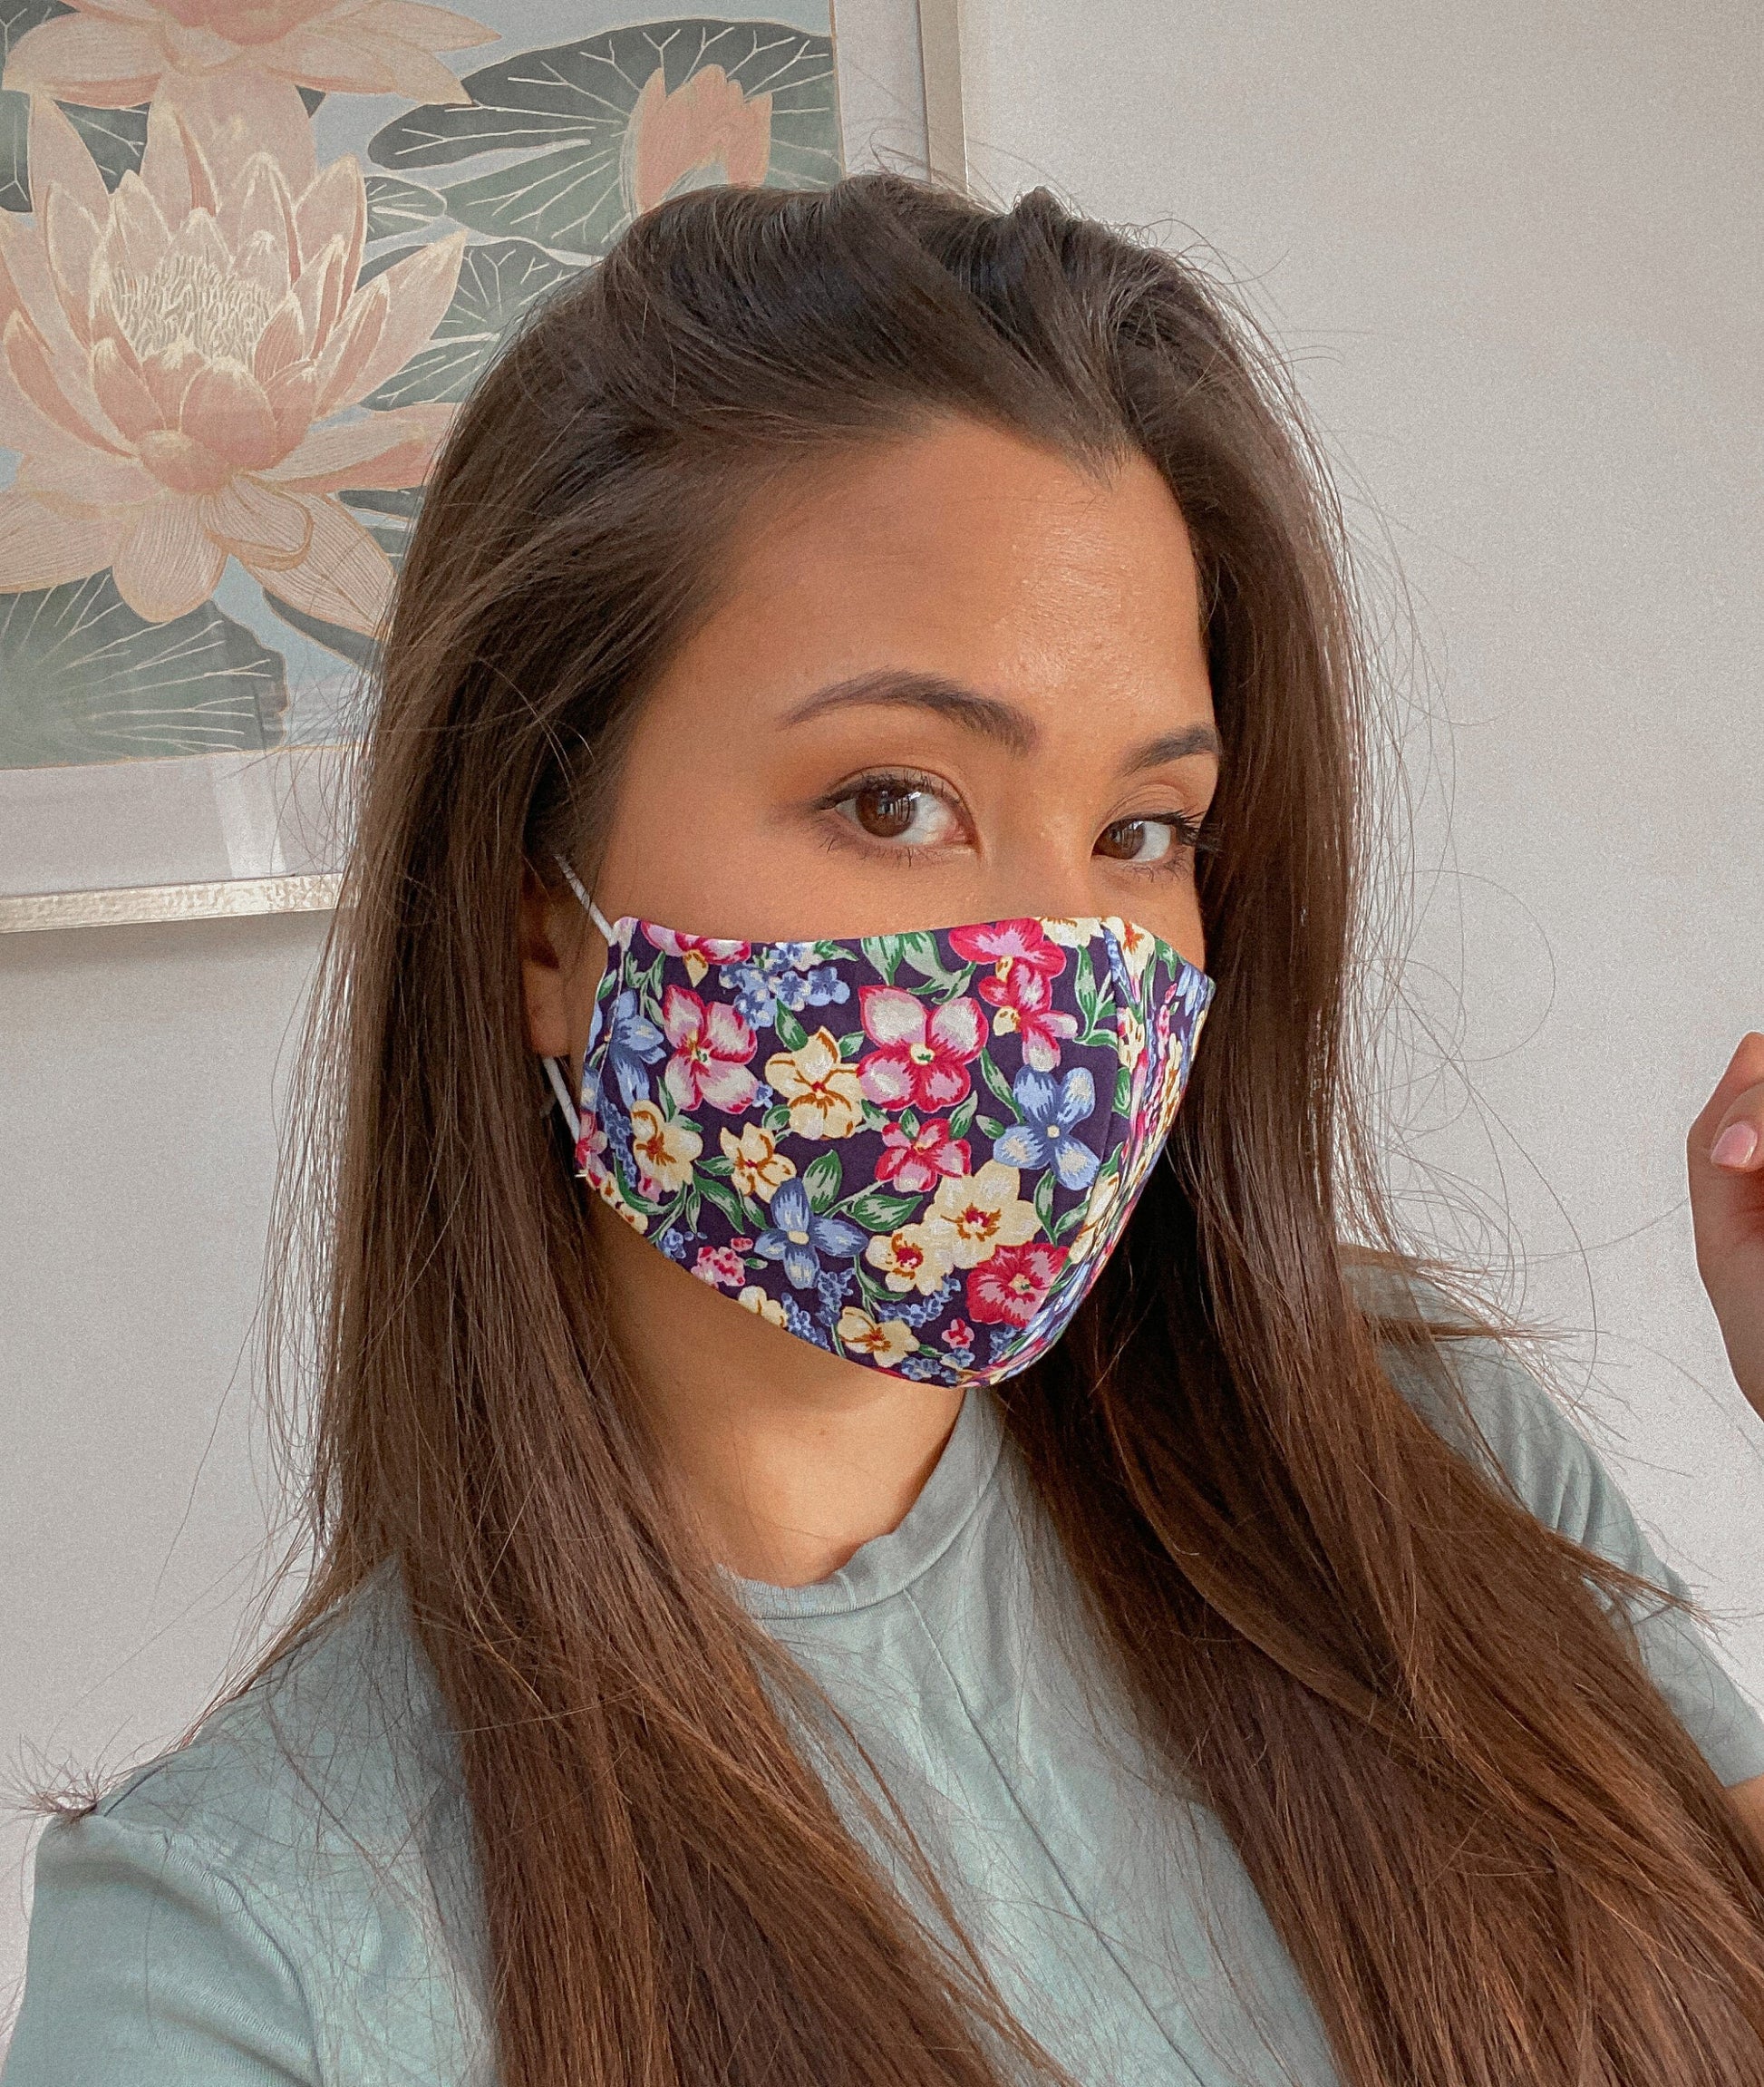 NAVY FLORAL REVERSIBLE 2 in 1 Mask Adjustable Super Soft Elastic. Washable Reusable homemade face masks Double layer cotton made in U.K.